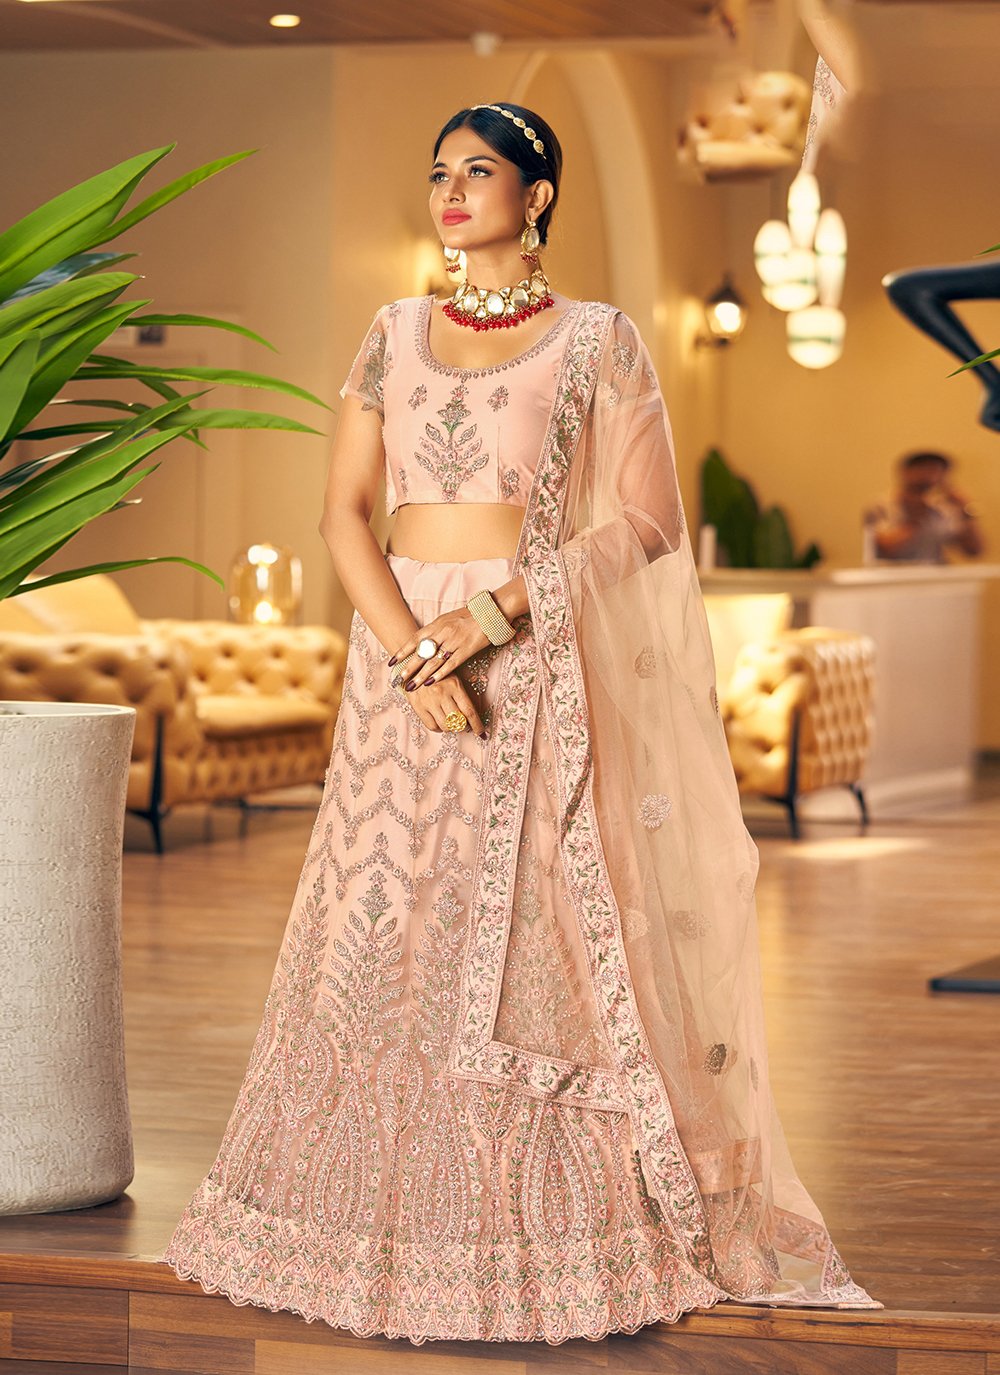 Pakistani Wedding lehenga in shades of gold,pink and peach on her wedding  day | eBay